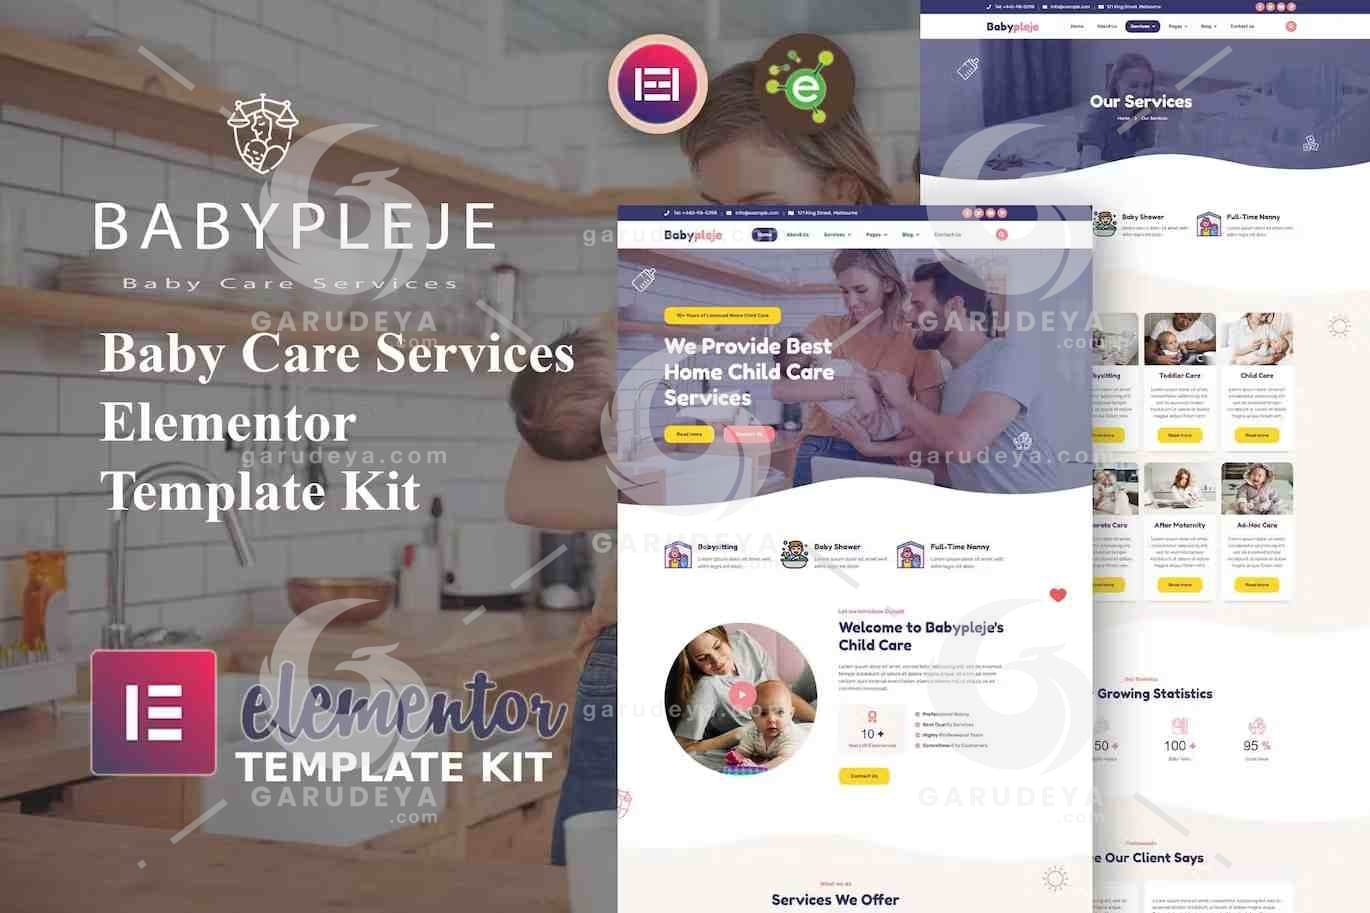 Babypleje – Baby Care Services Elementor Template Kit